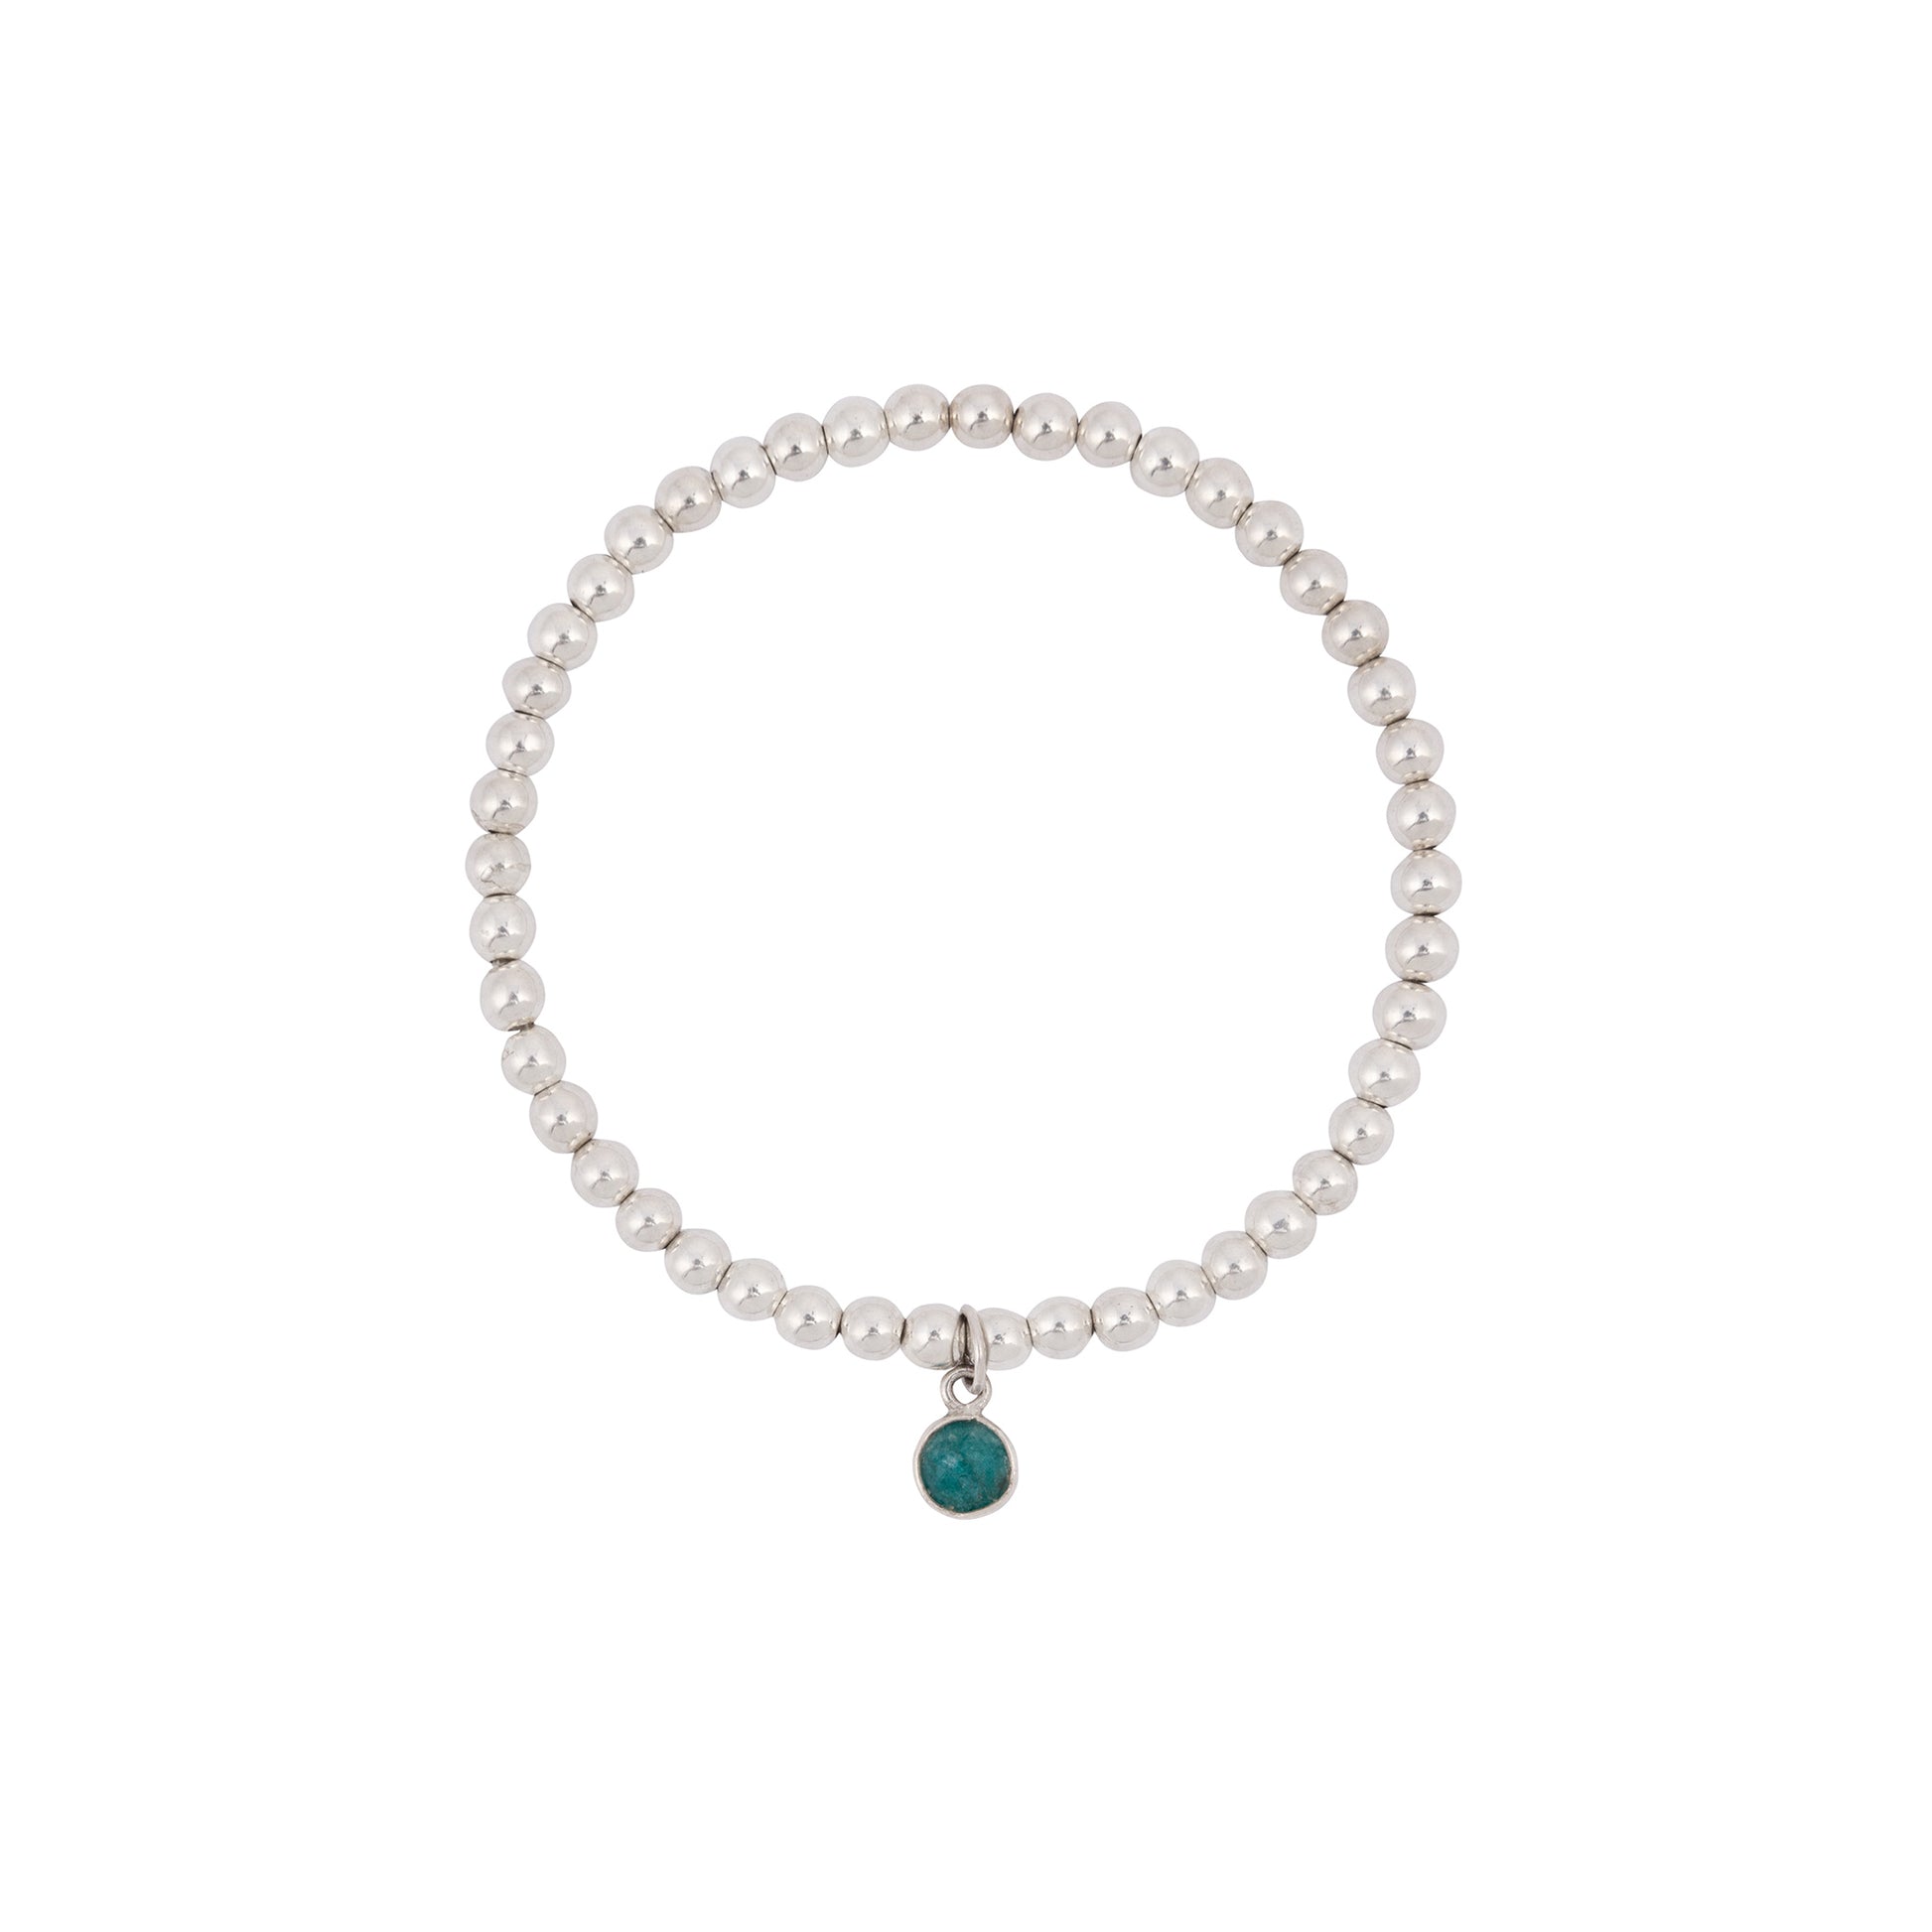 The Made Here with Love Emerald May Birthstone Bracelet is a sterling silver bracelet with uniformly round, smooth beads that form a complete circle, featuring a small green circular pendant representing the May birthstone. The pendant adds a touch of color to the sleek and elegant design.